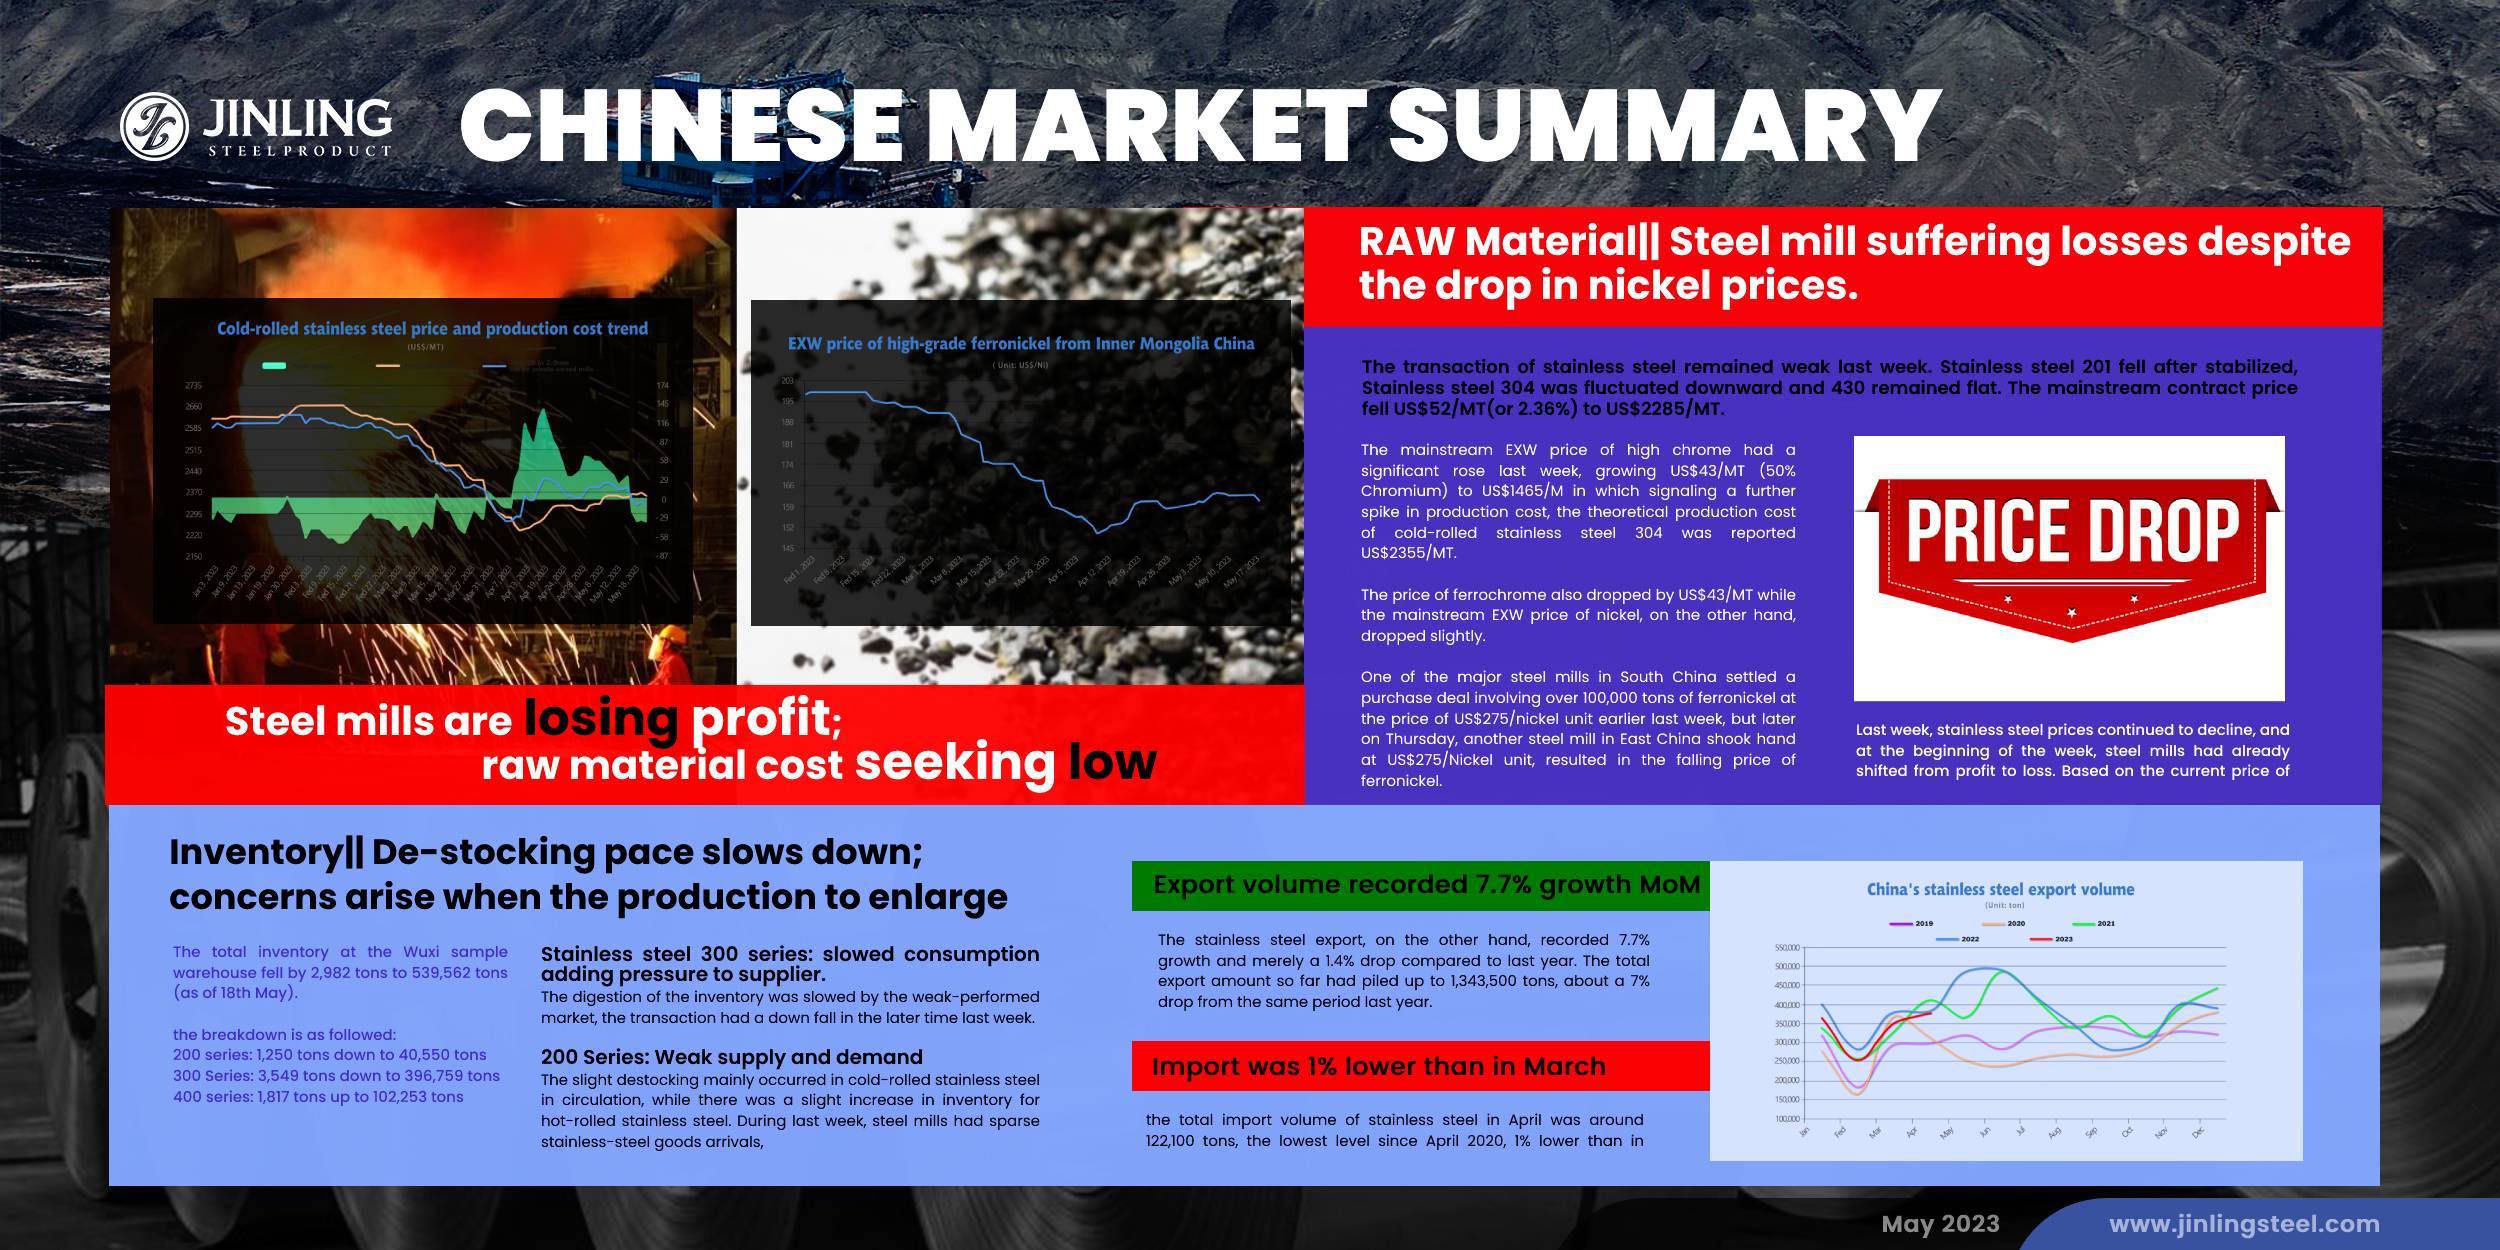 Stainless Steel Market Summary in China || The market is stably weak. De-stocking pace slows down and production is to enlarge (May 15 ~ May 19)